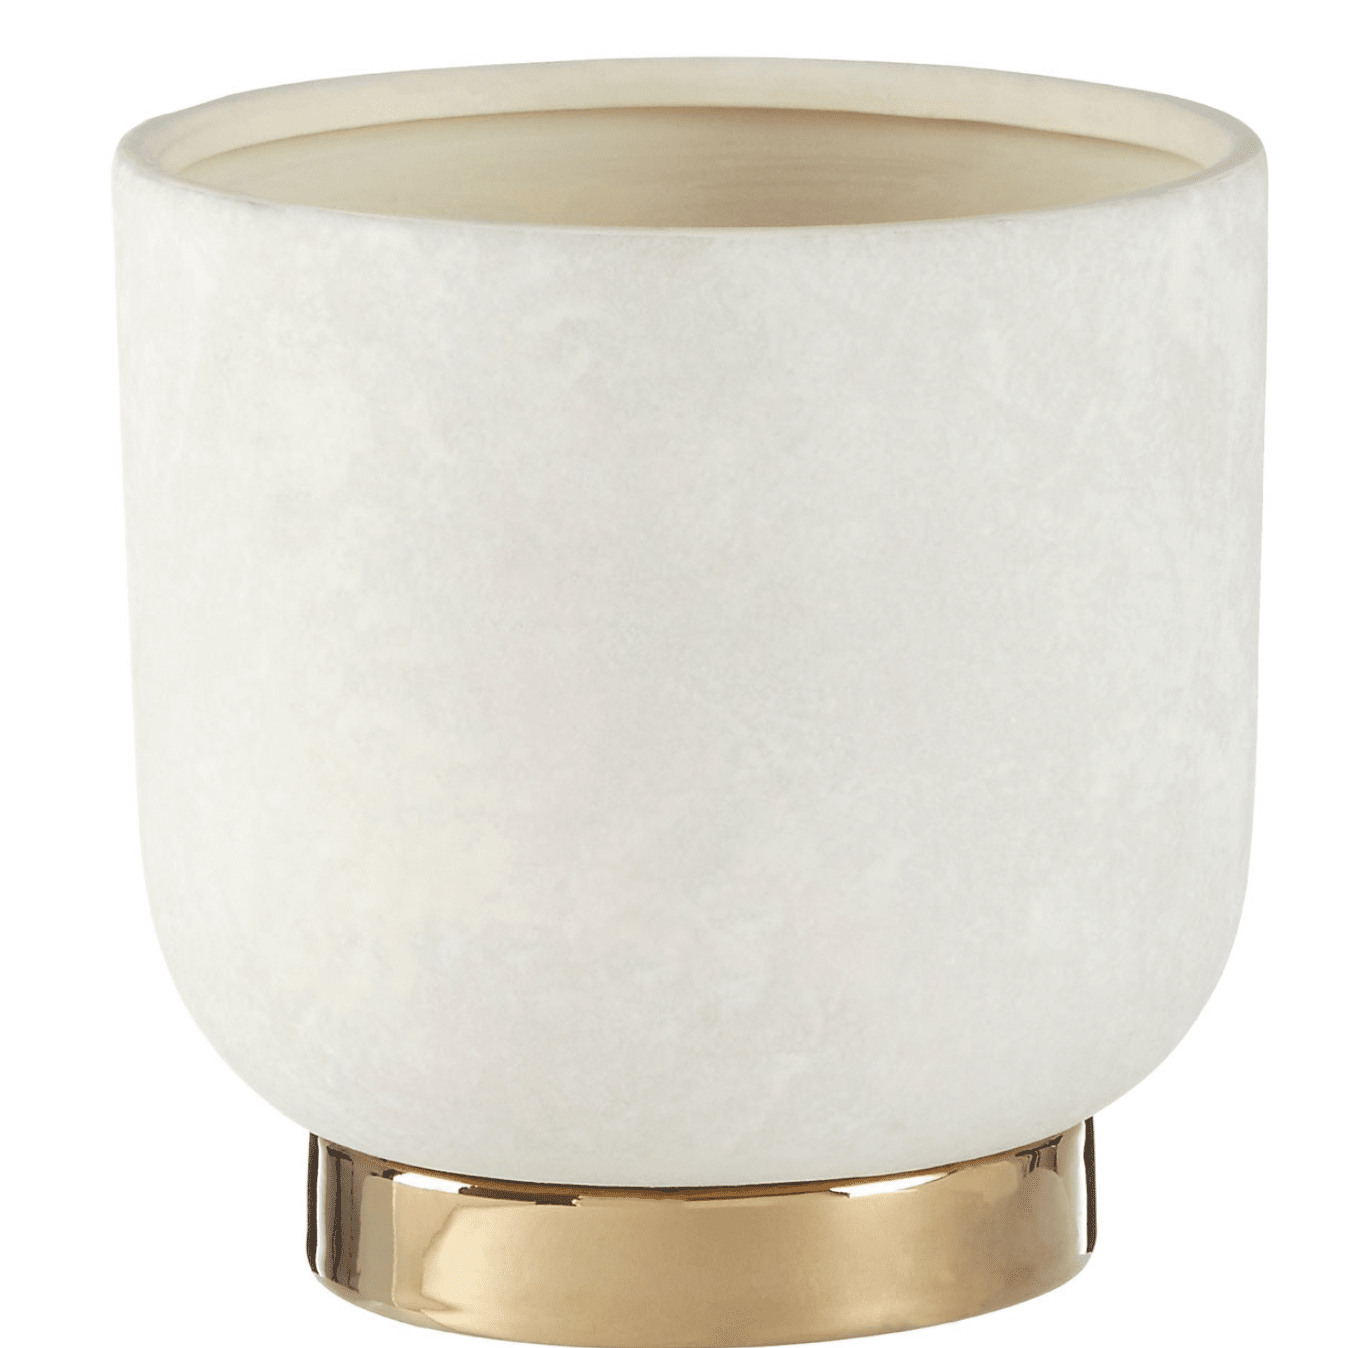 White And Gold Ceramic Planter - Outlet - Save 20%